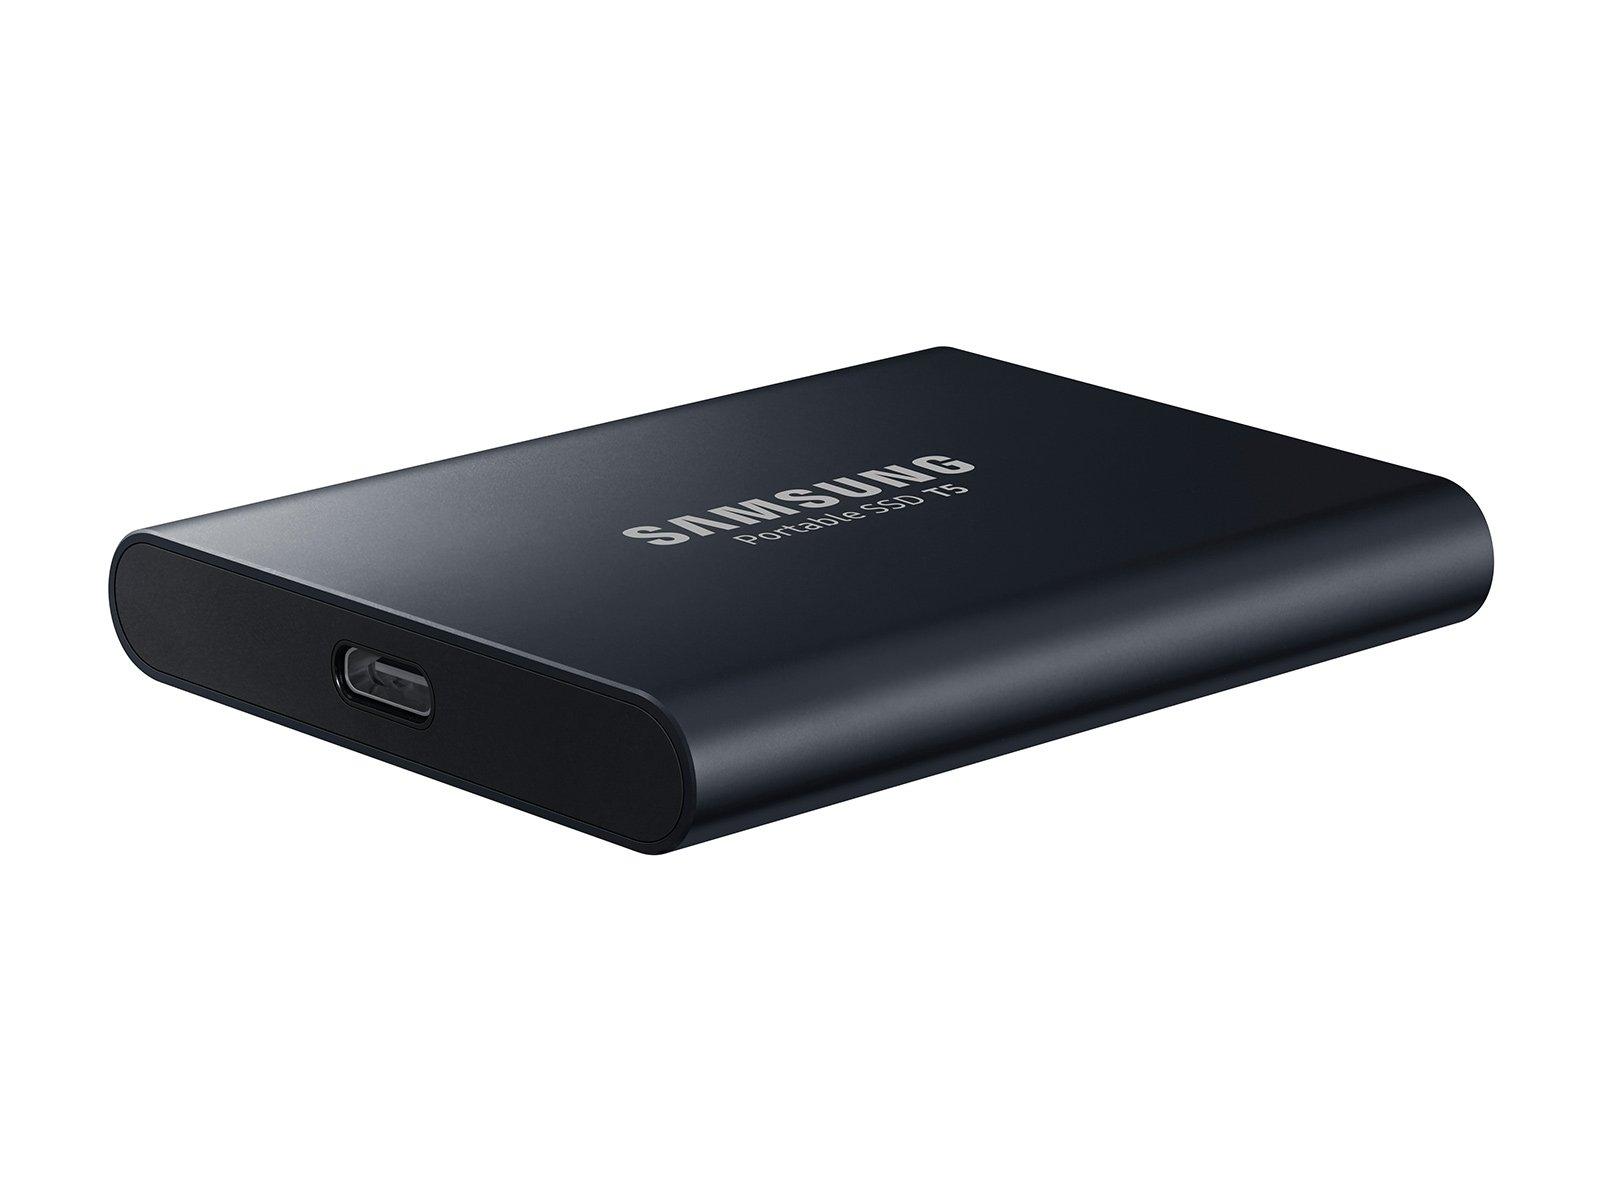 list item 5 of 6 Samsung T5 2TB USB-C External Portable Solid State Drive